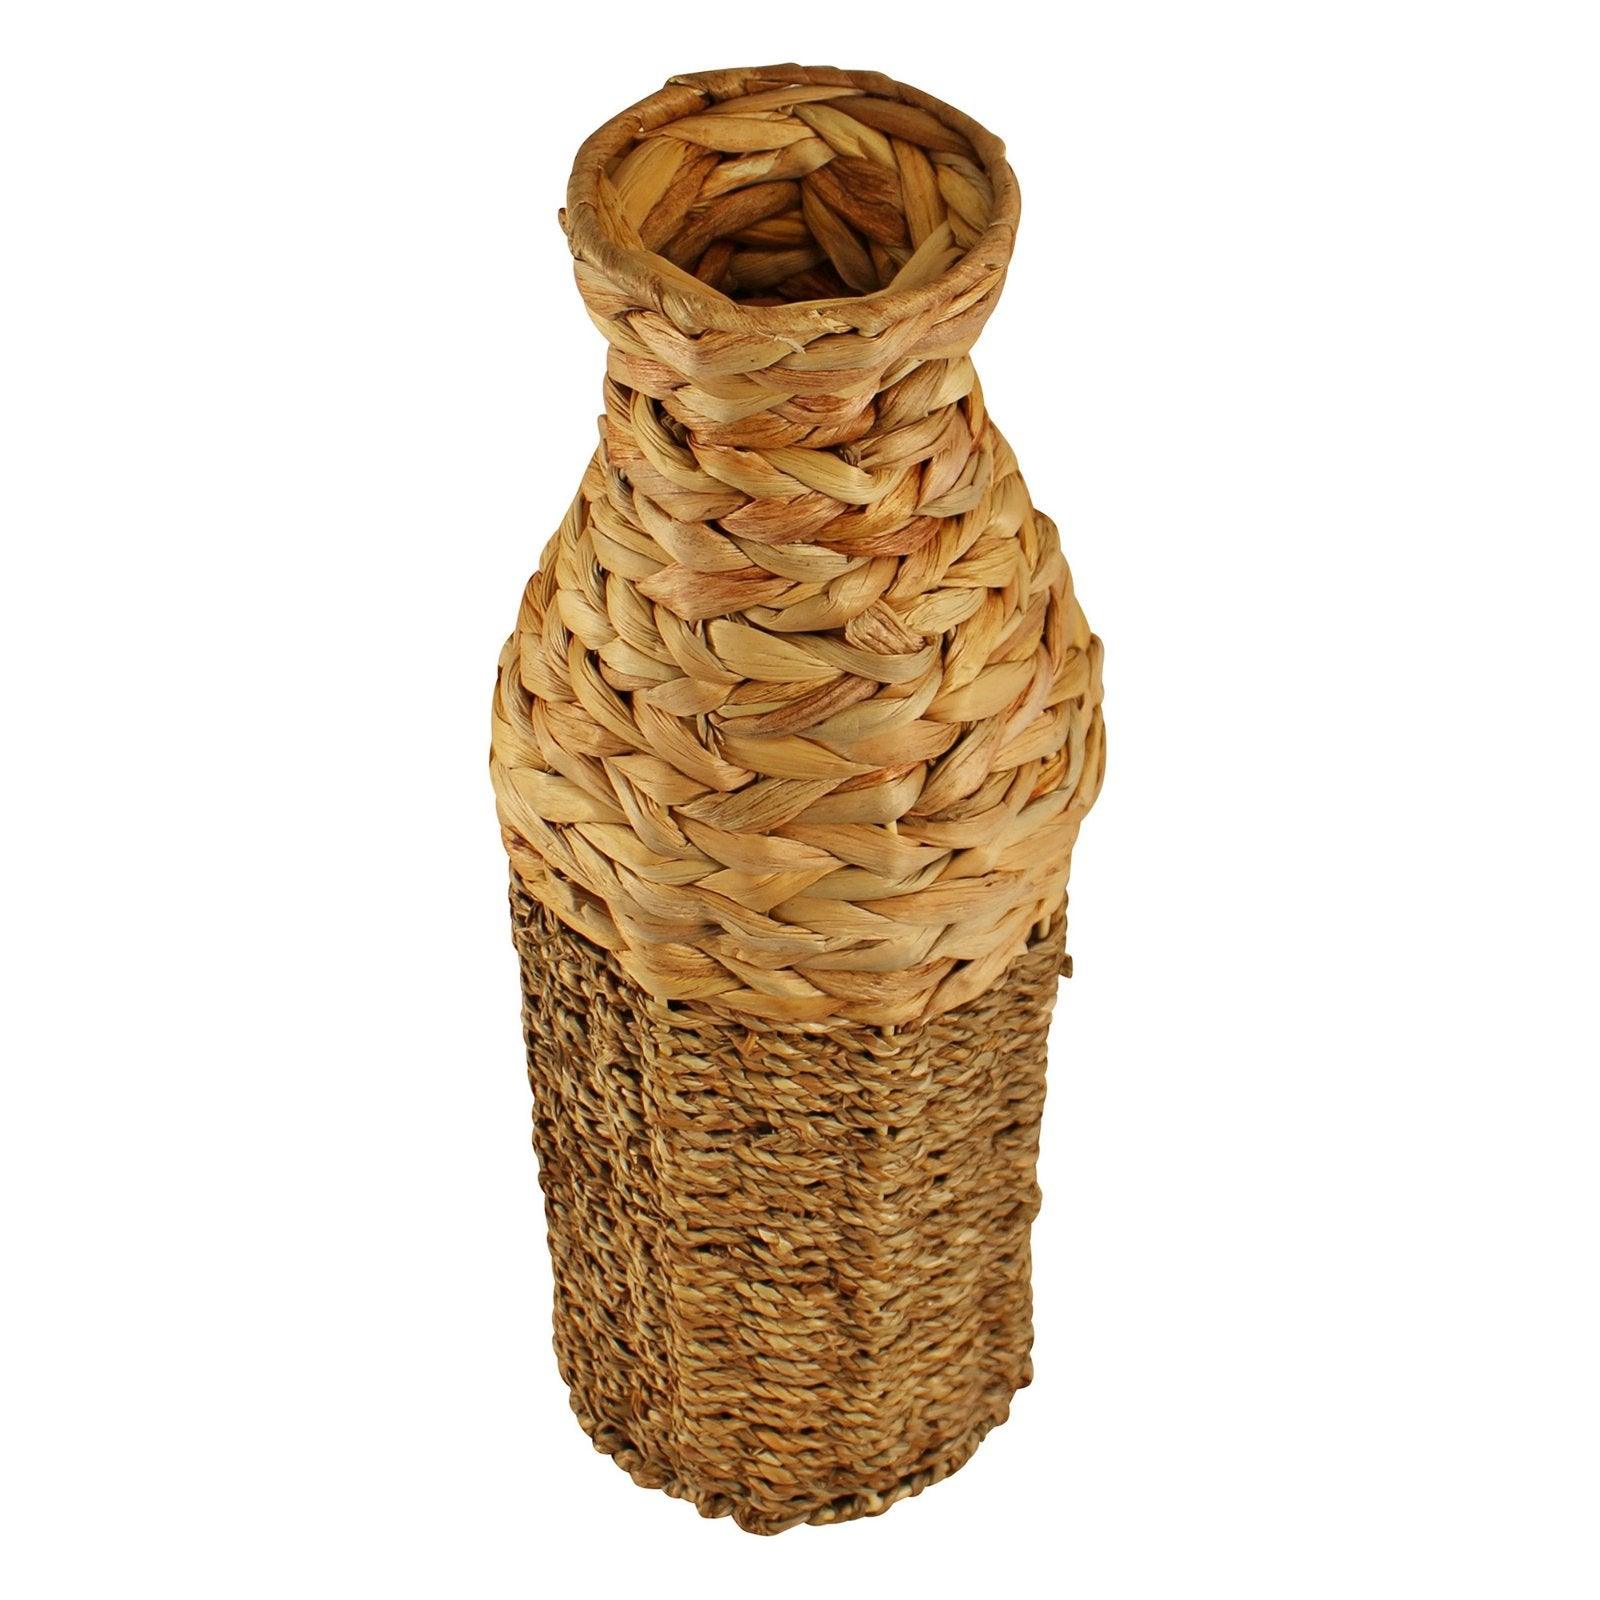 View Natural Interiors Bamboo Seagrass Vase 45cm information